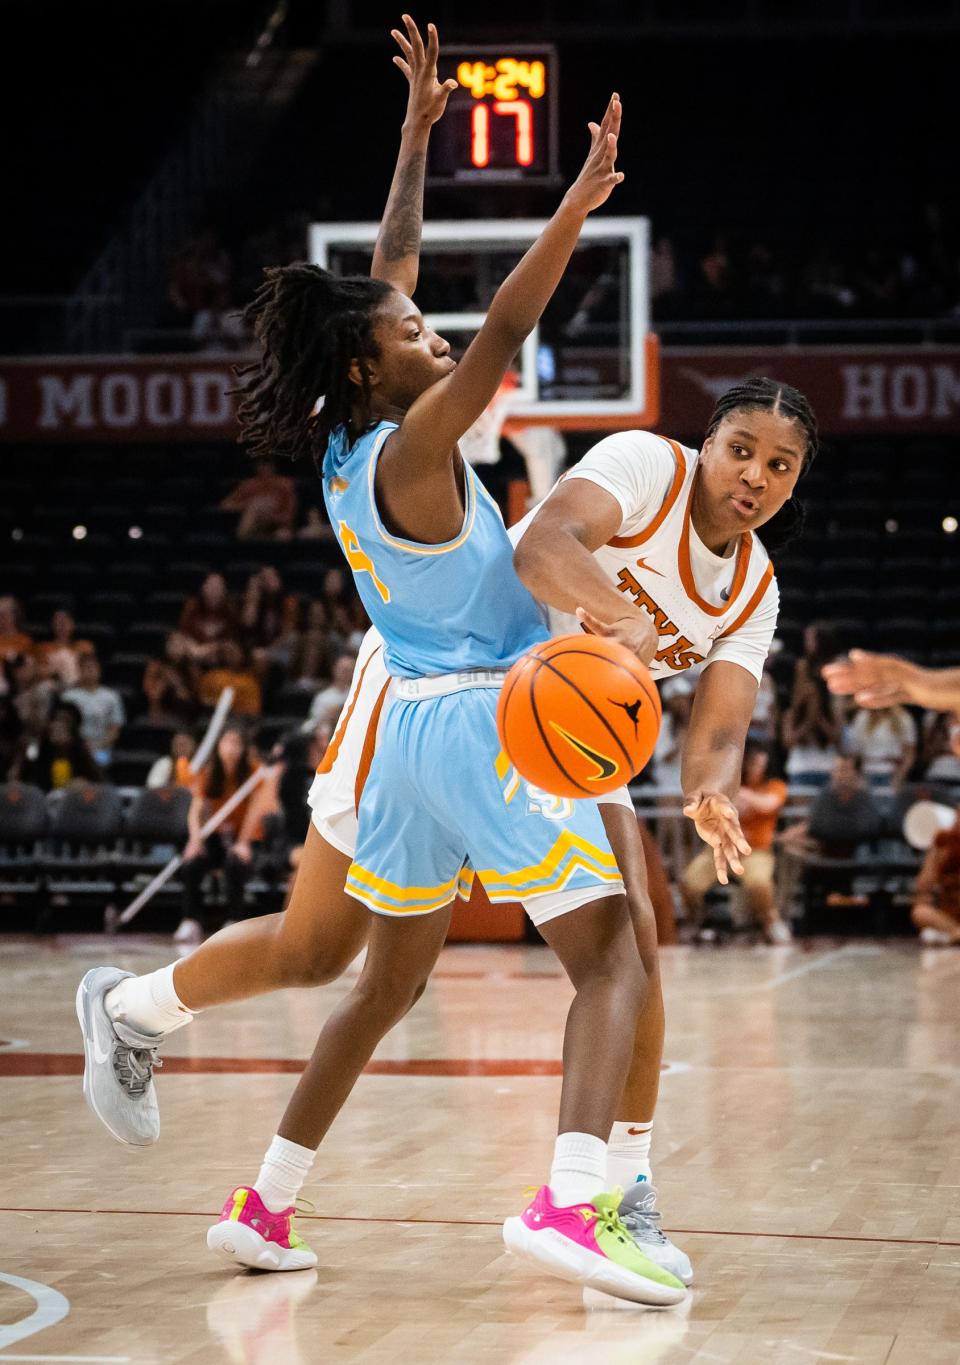 Texas forward Madison Booker slots a pass to a teammate around defense from Southern guard Chloe Fleming during the Longhorns' game against the Jaguars at Moody Center on Nov. 8. Texas won the game 80-35.